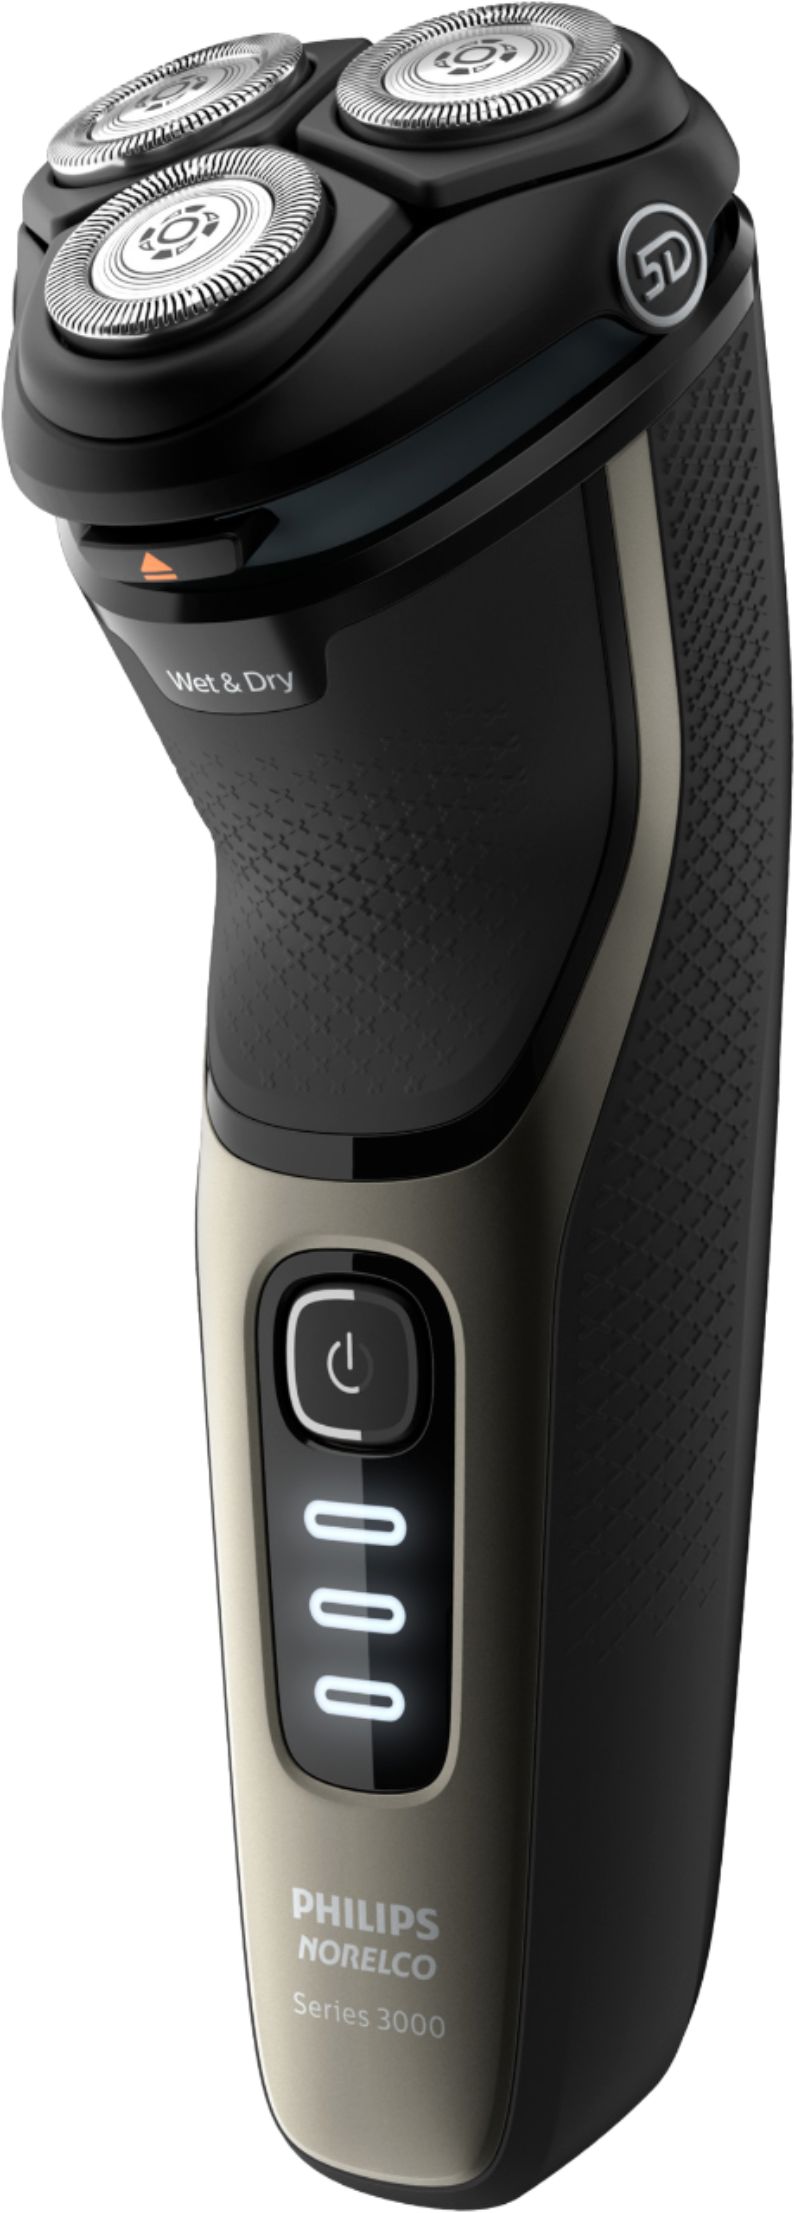 Left View: Philips Norelco CareTouch, Rechargeable Wet & Dry Shaver with Pop-Up Trimmer, S3210/51 - Ash gold